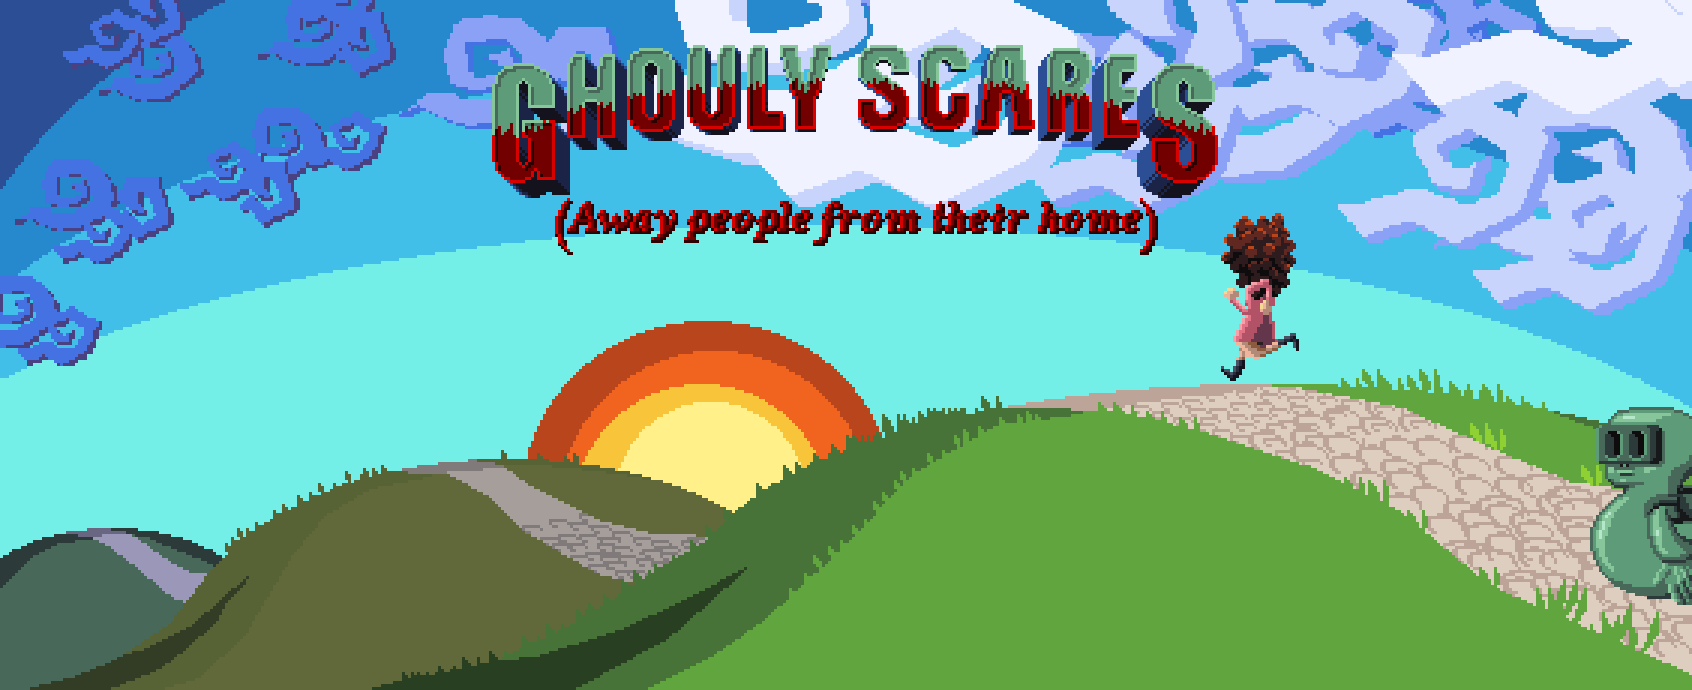 Ghouly Scares (Away people from their home)